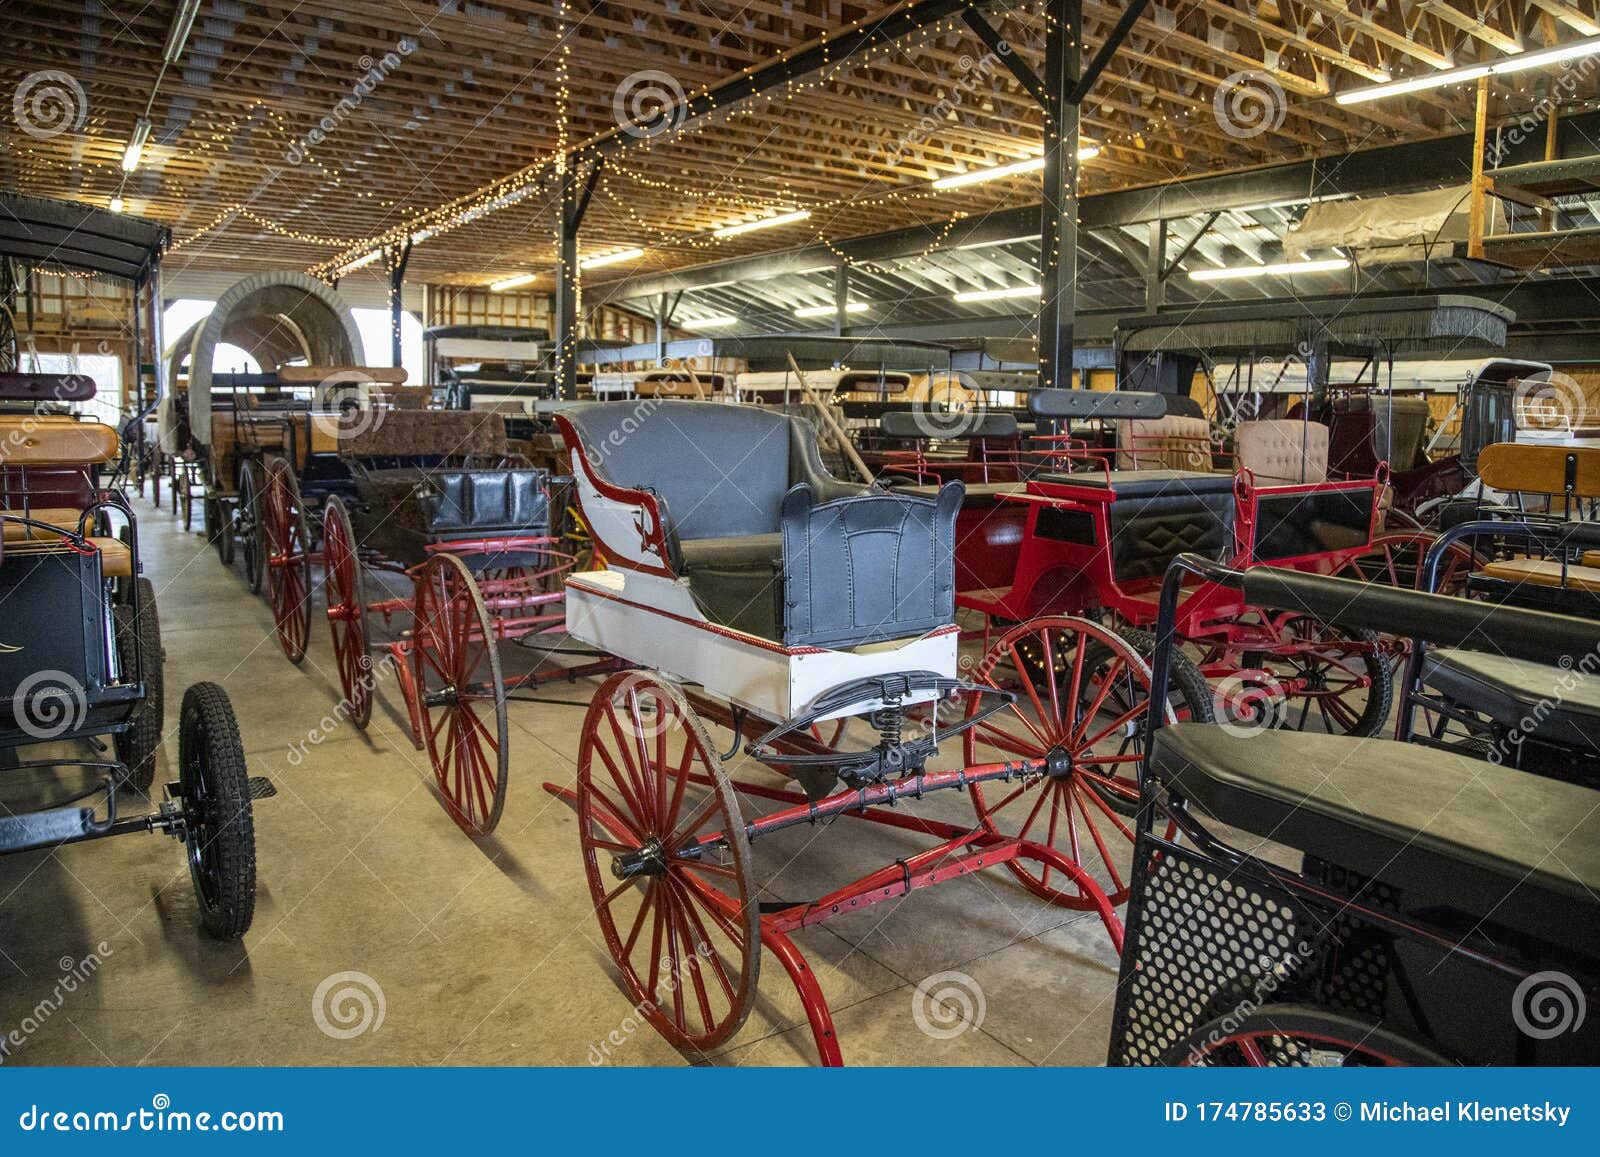 collection of antique horse drawn carriages